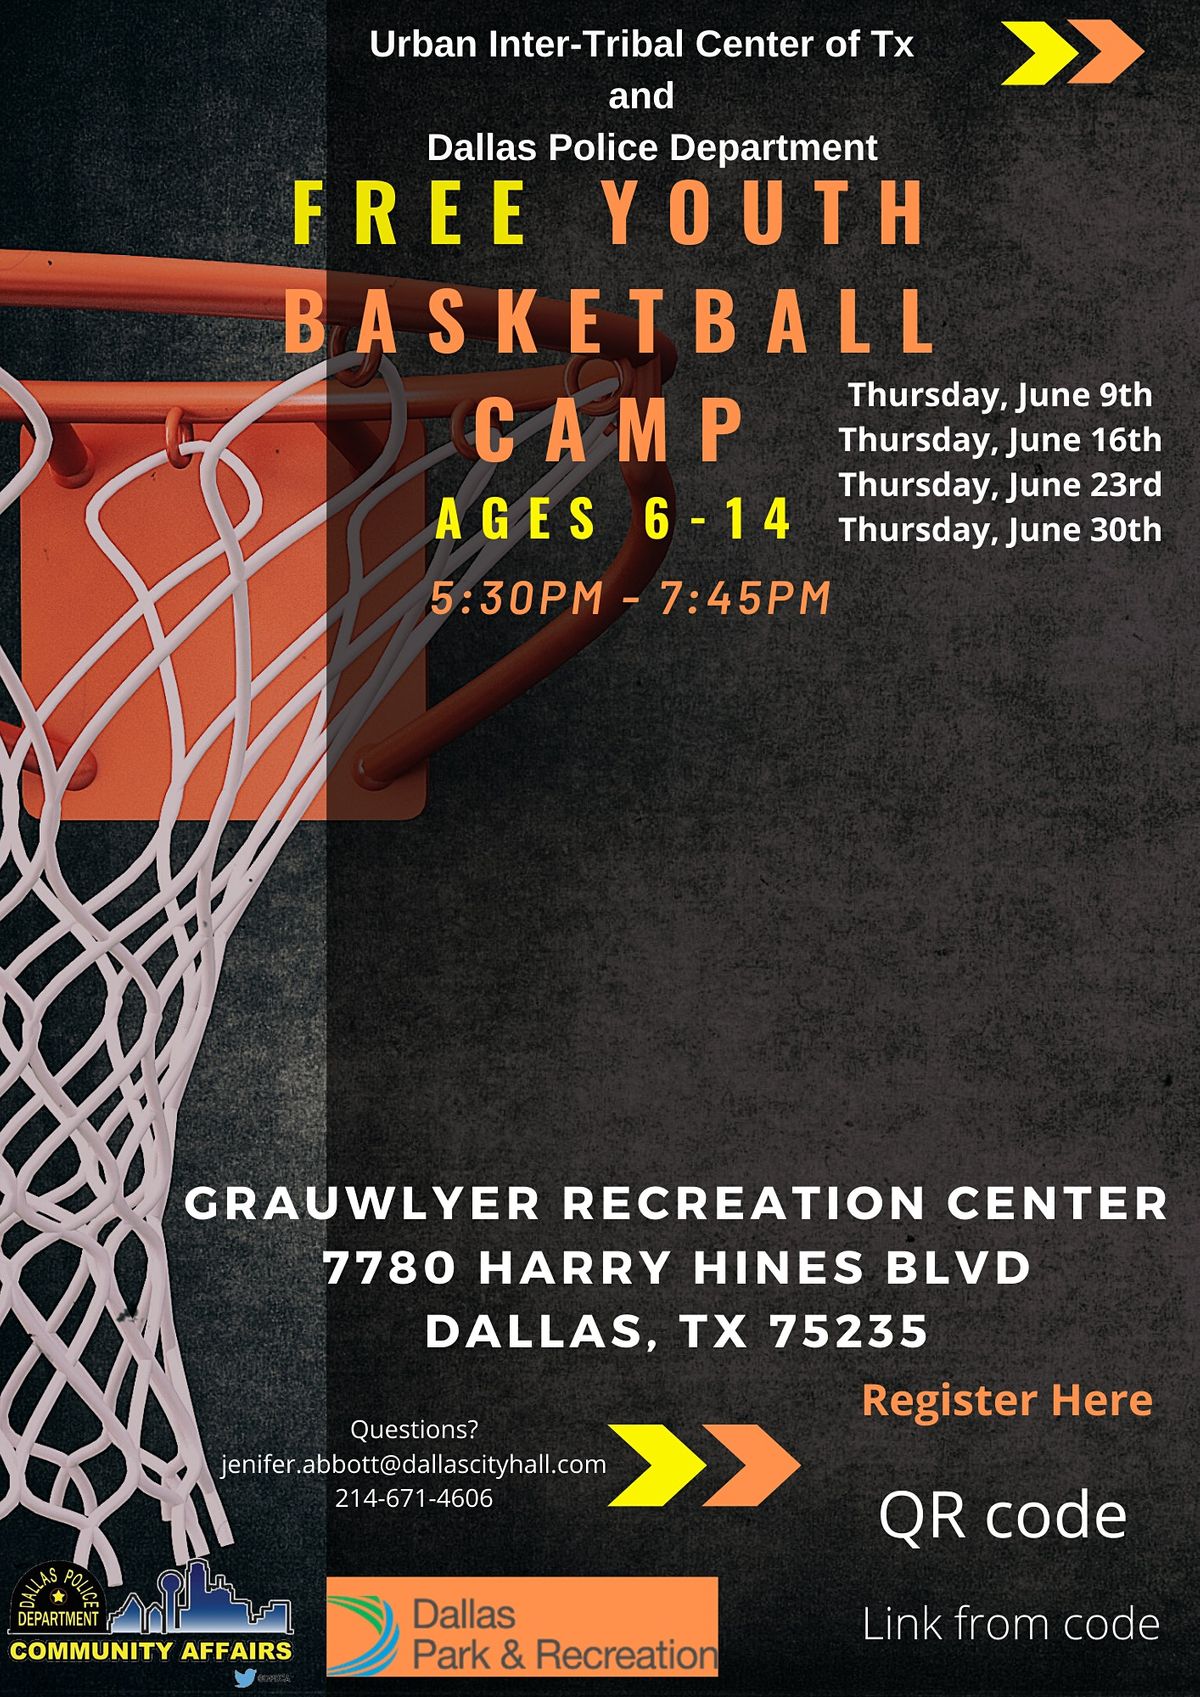 Dallas PD and UITCT Free Youth Basketball Camp